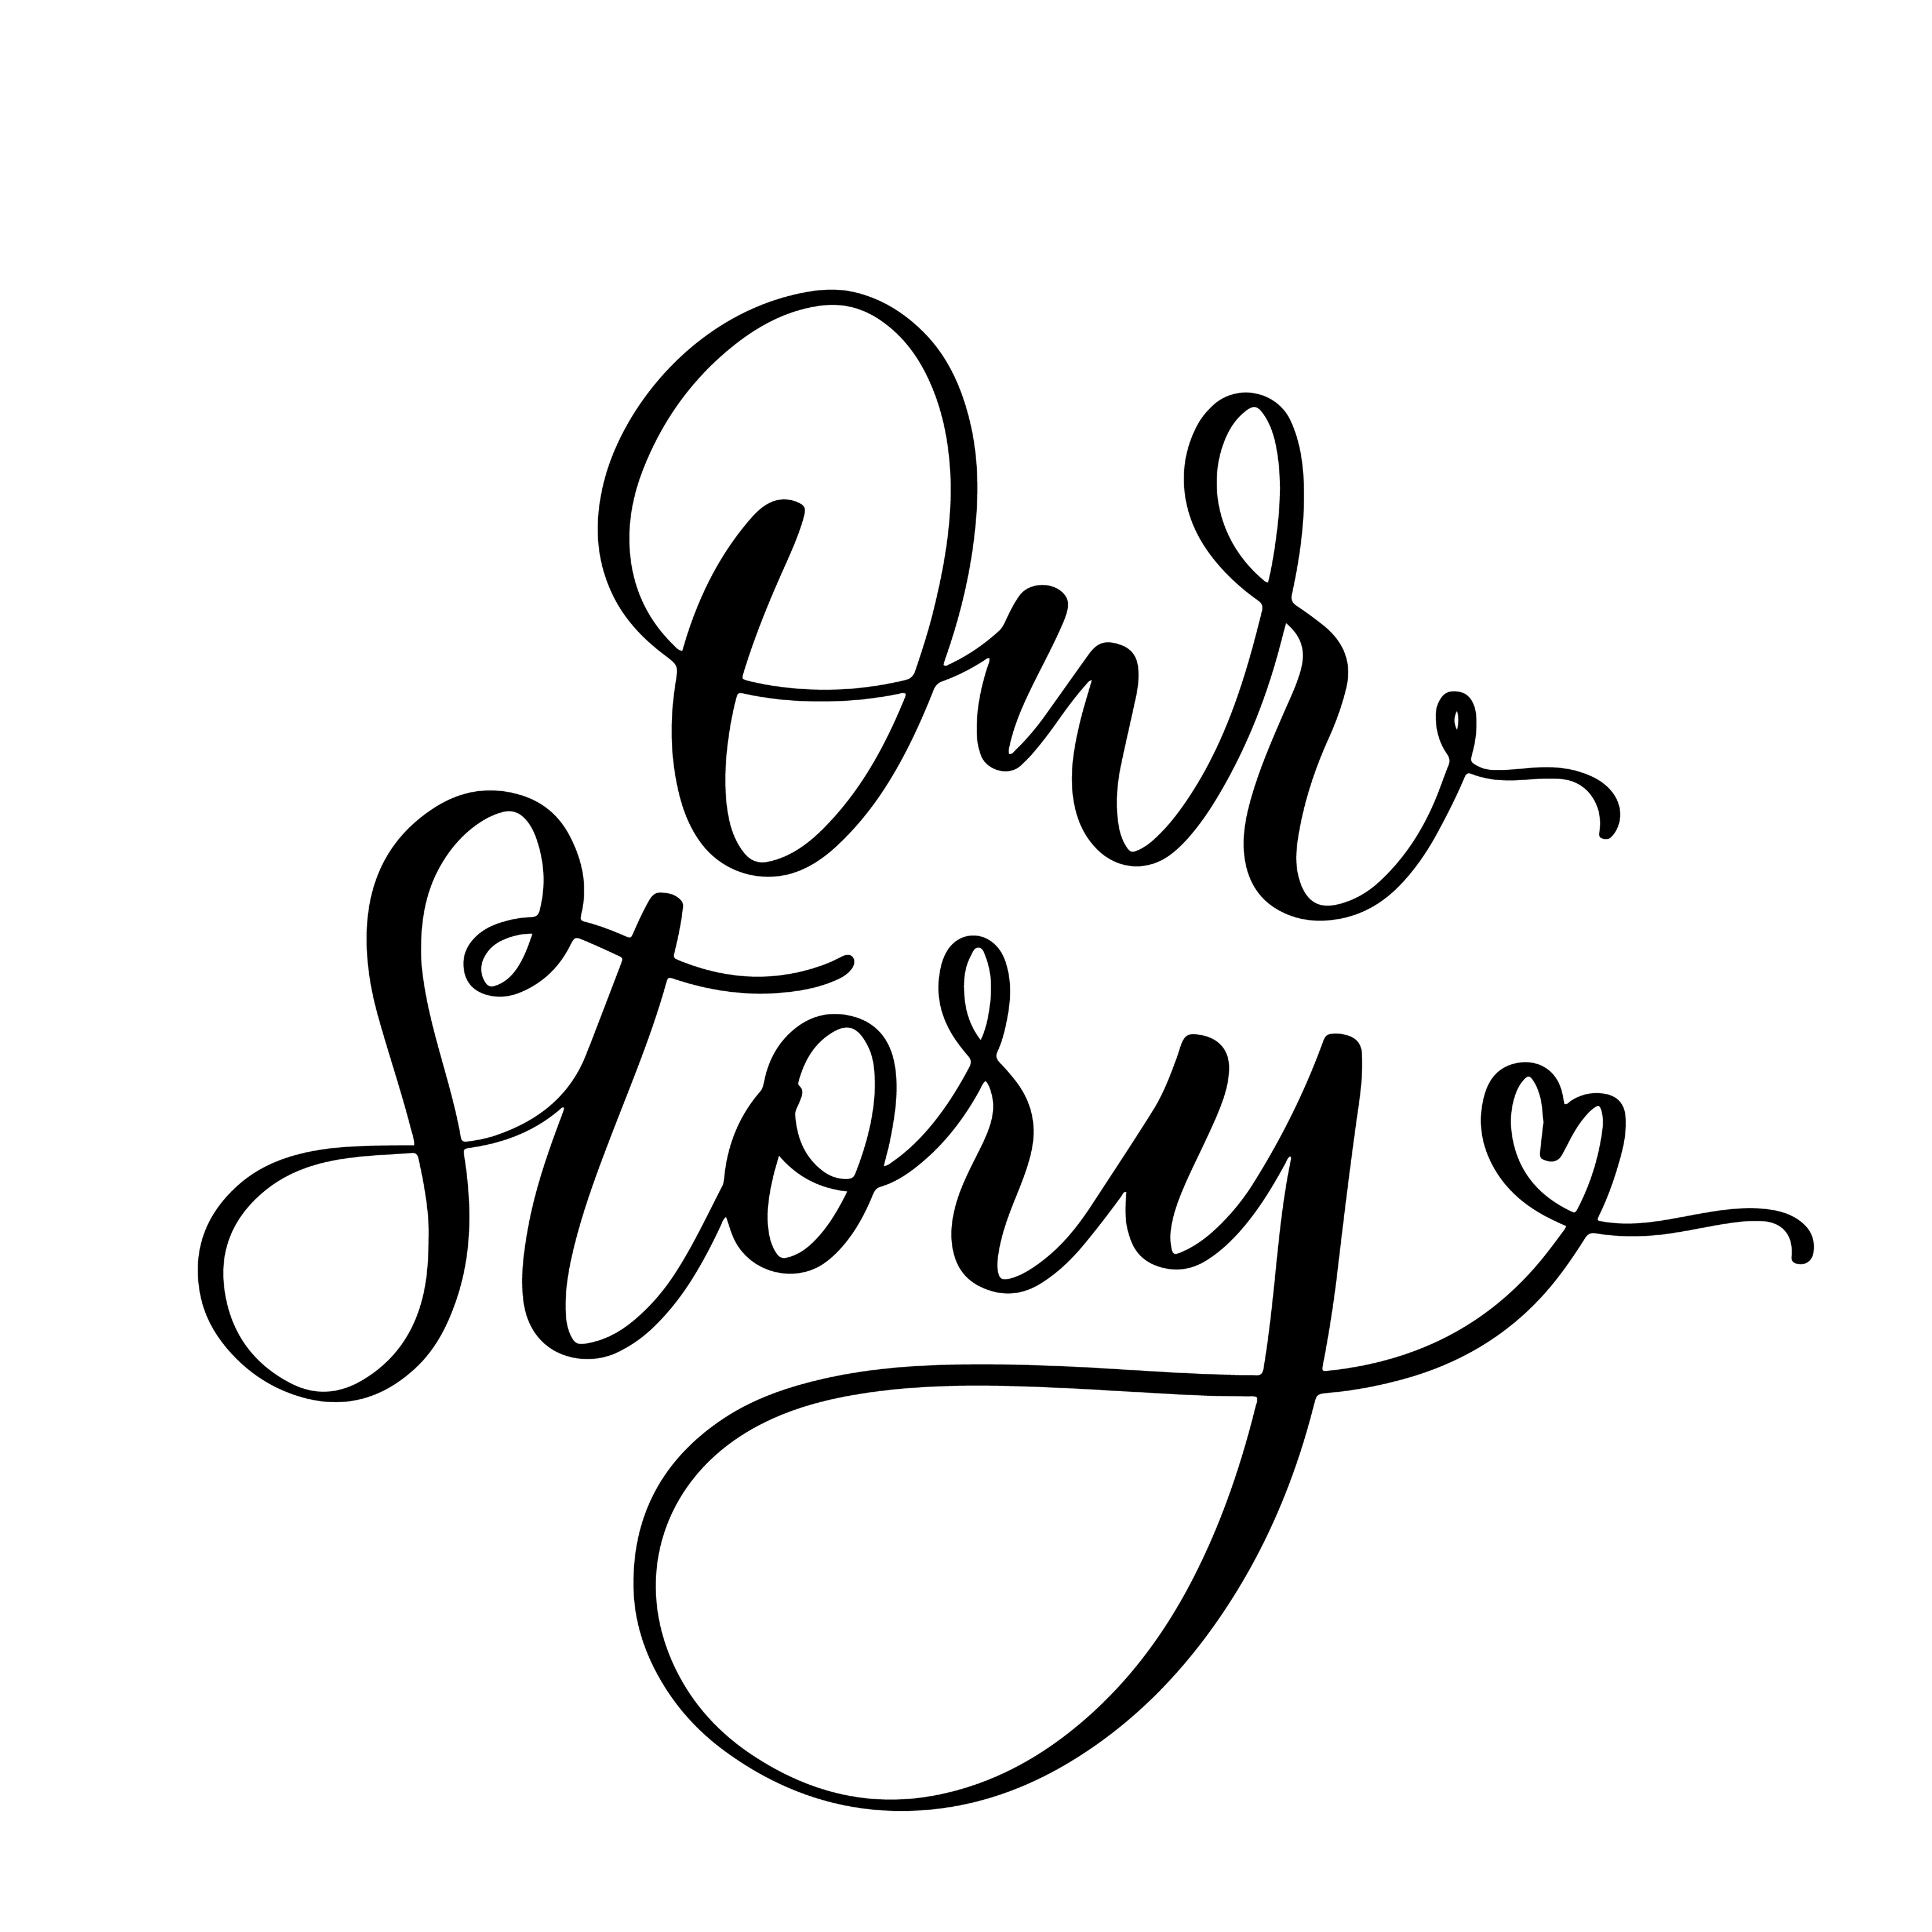 OUR STORY